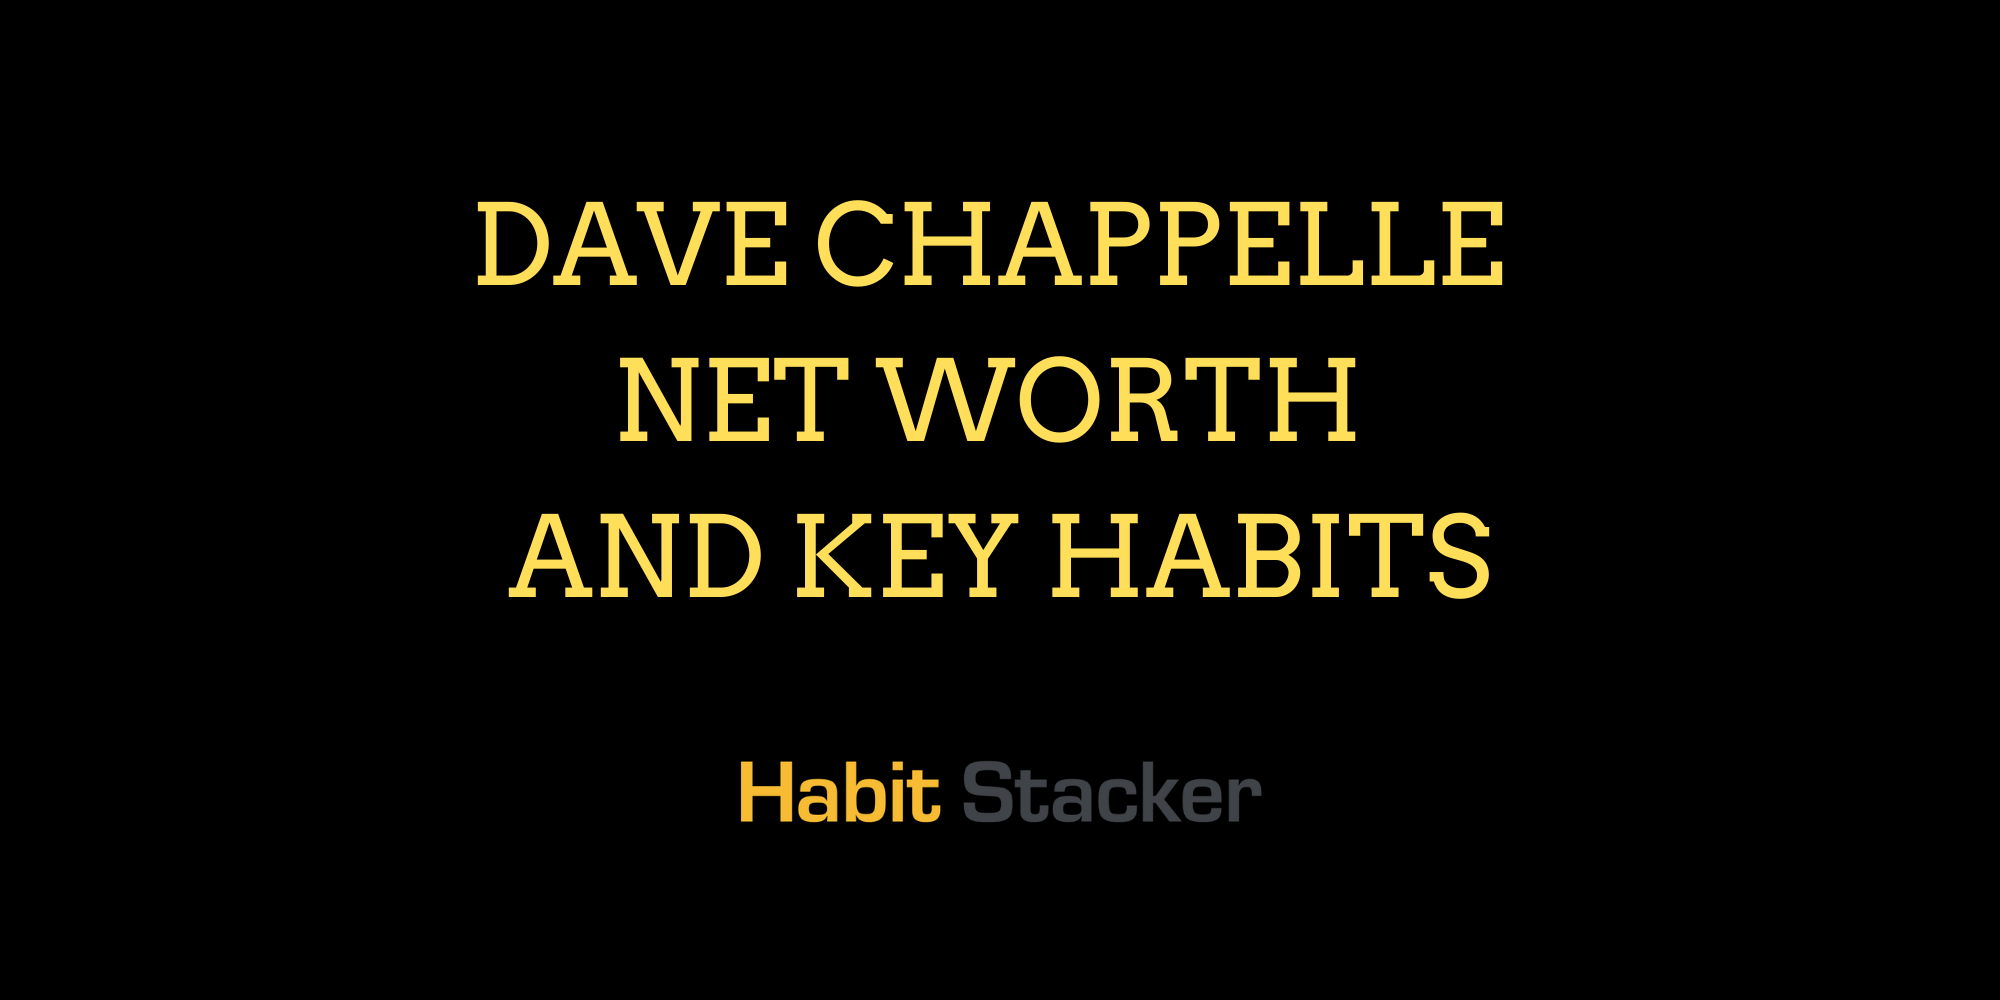 Dave Chappelle Net Worth and Key Habits